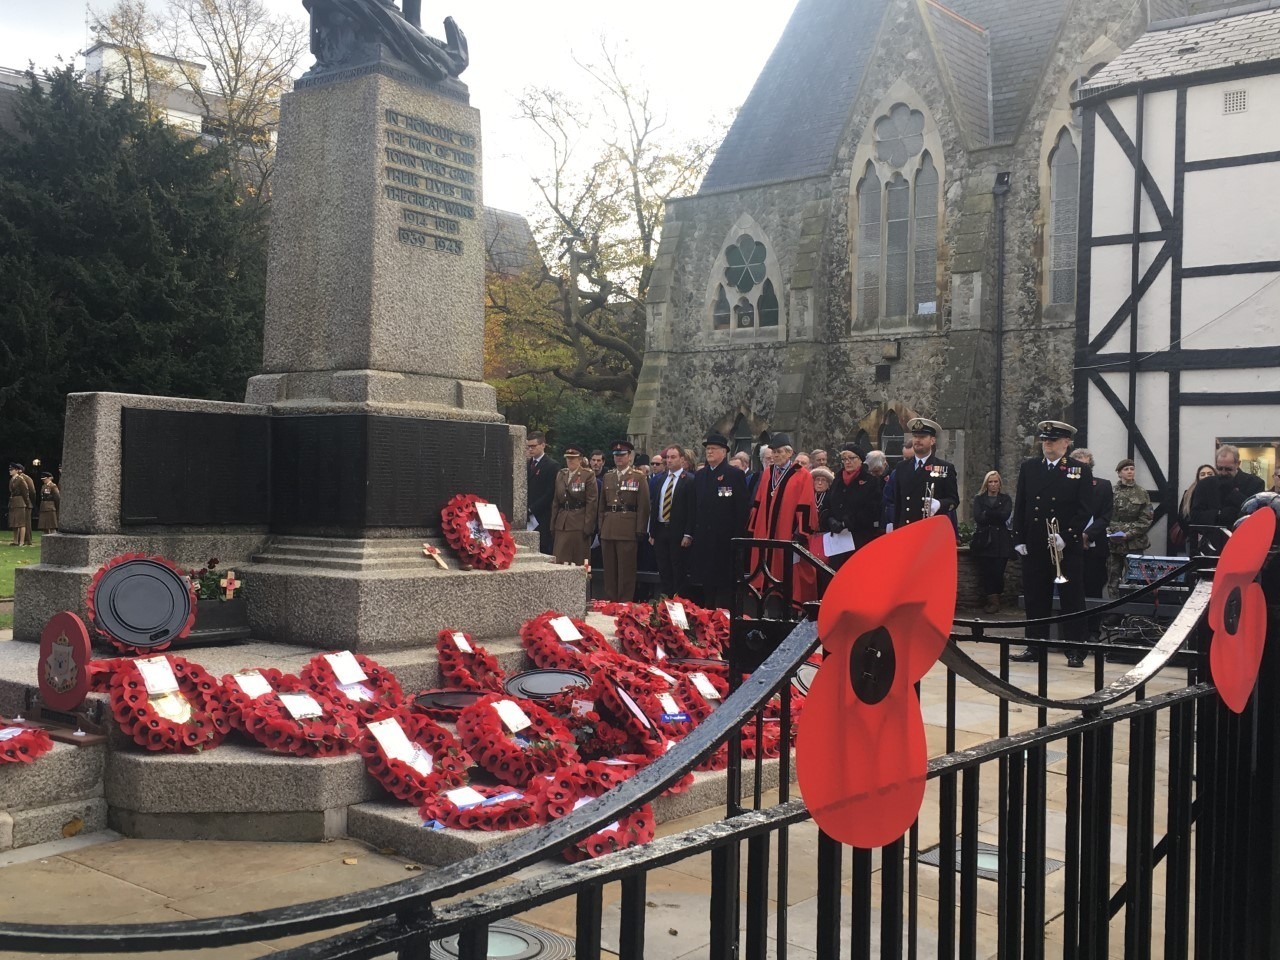 Kingston honours veterans past and present on Remembrance Day